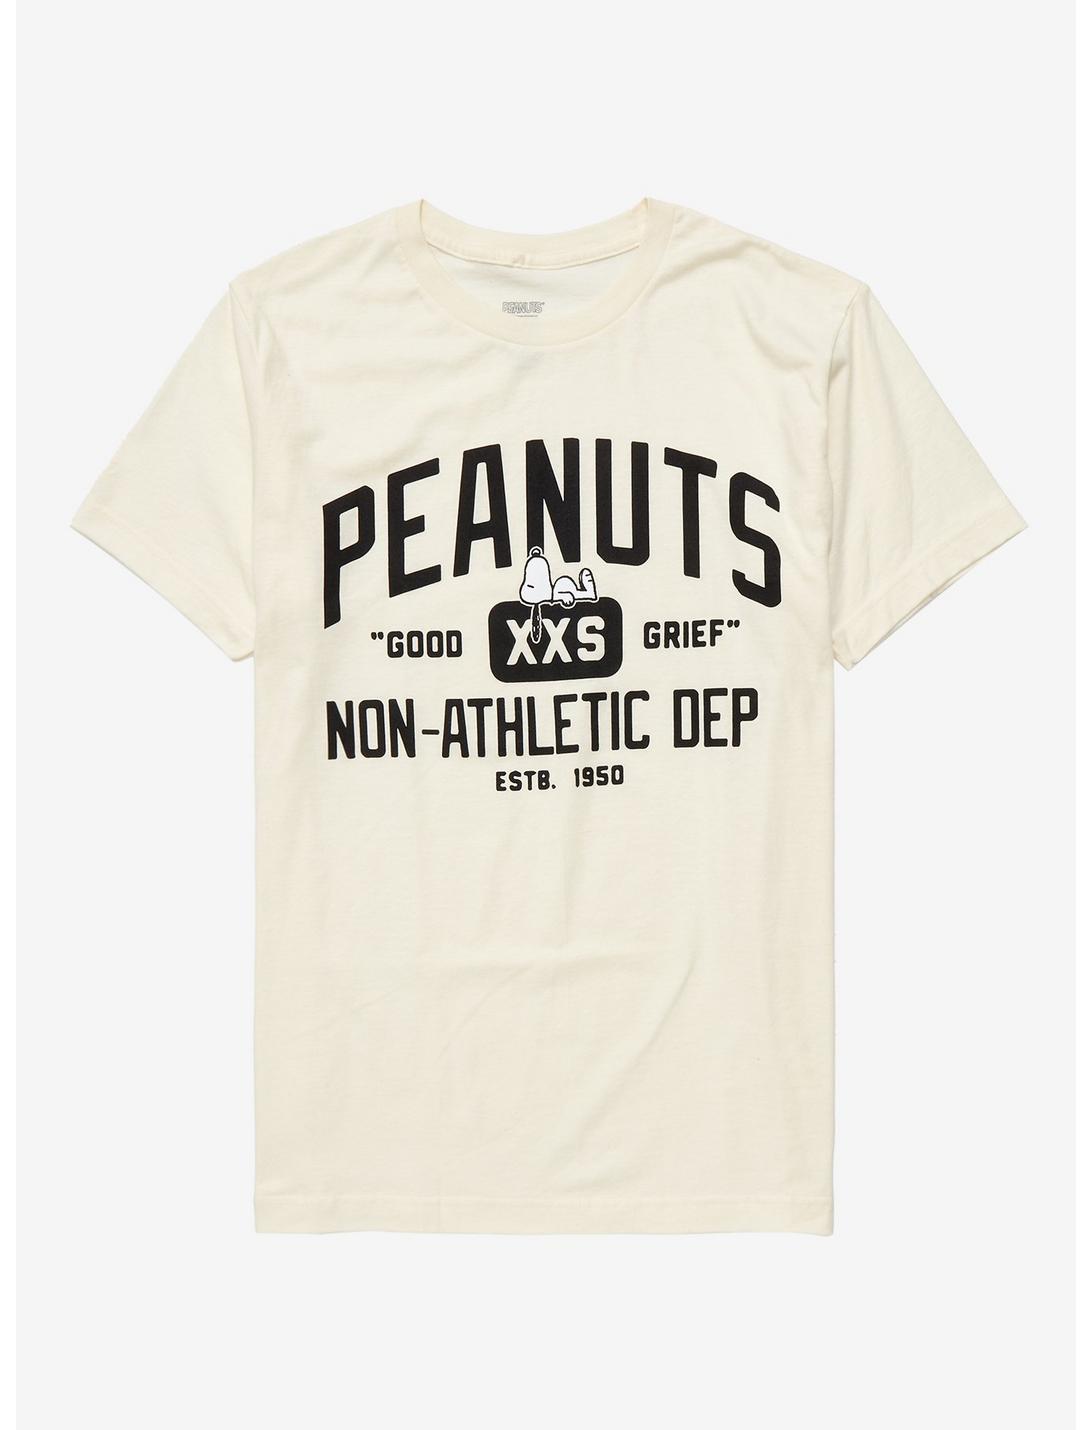 Peanuts Snoopy Non-Athletic Department T-Shirt - BoxLunch Exclusive , CREAM, hi-res